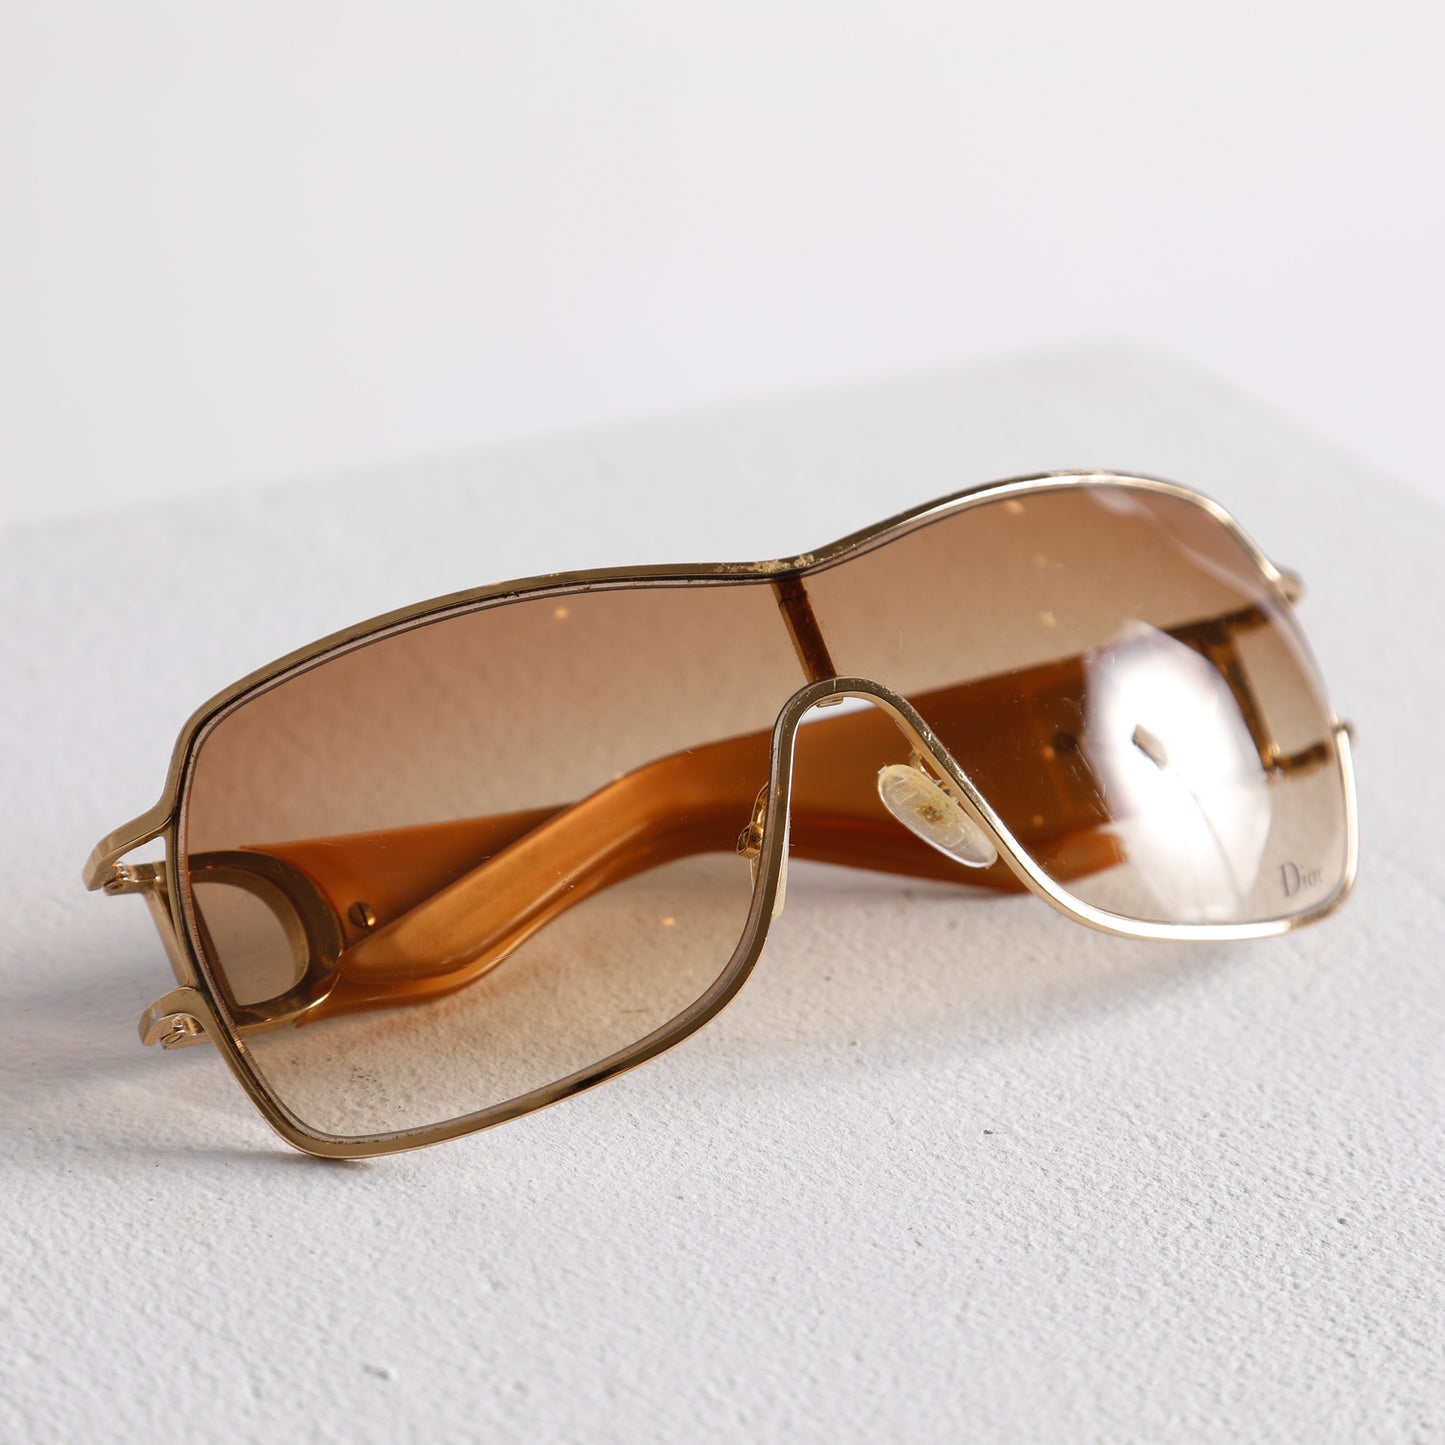 DIOR Gold and Beige Framed Tinted Sunglasses